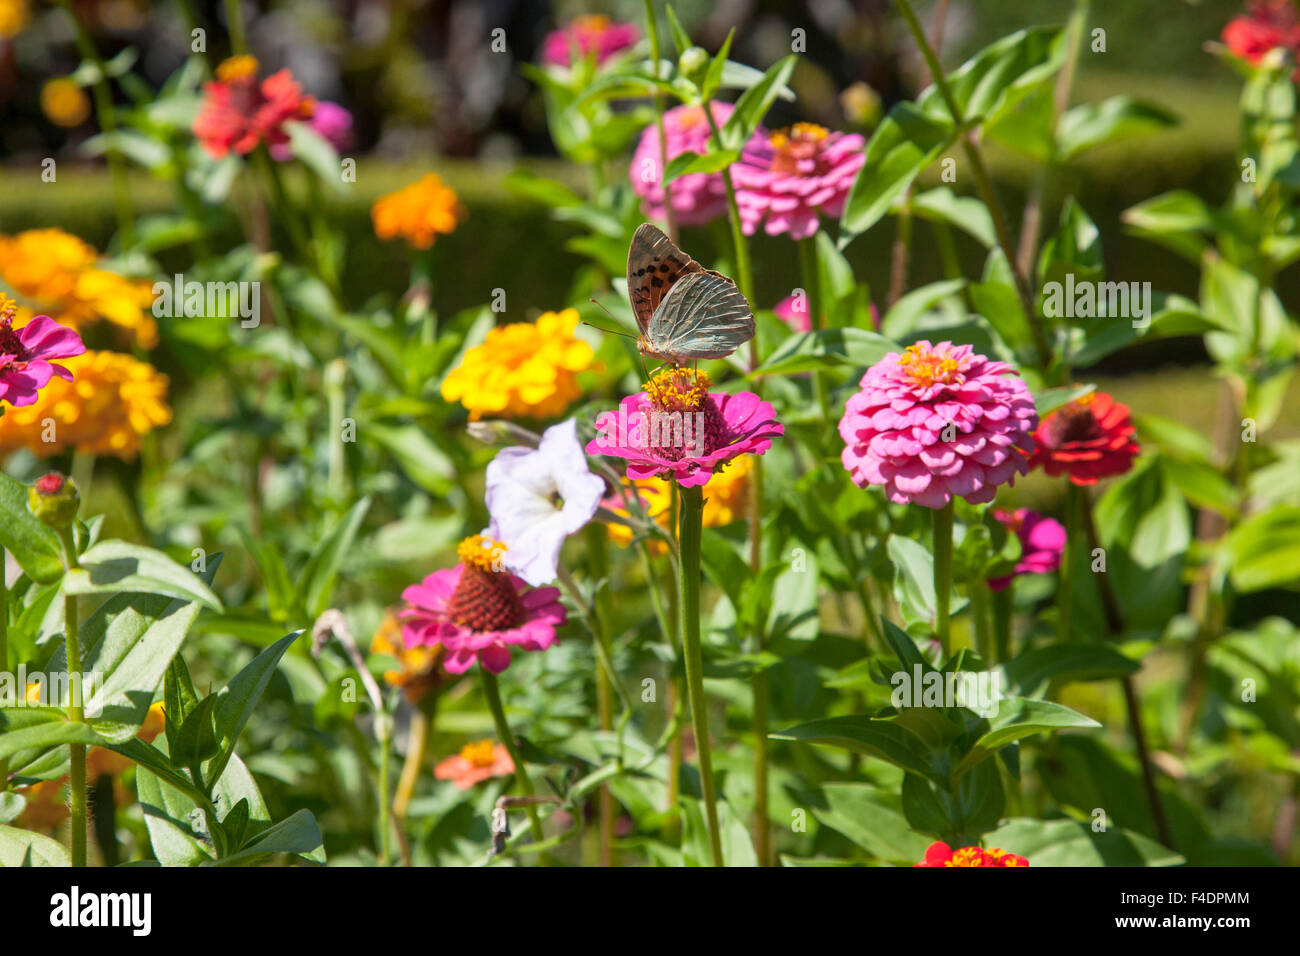 As part of the most beautiful country manor in Portugal are the outstanding gardens where this butterfly was captured. Stock Photo